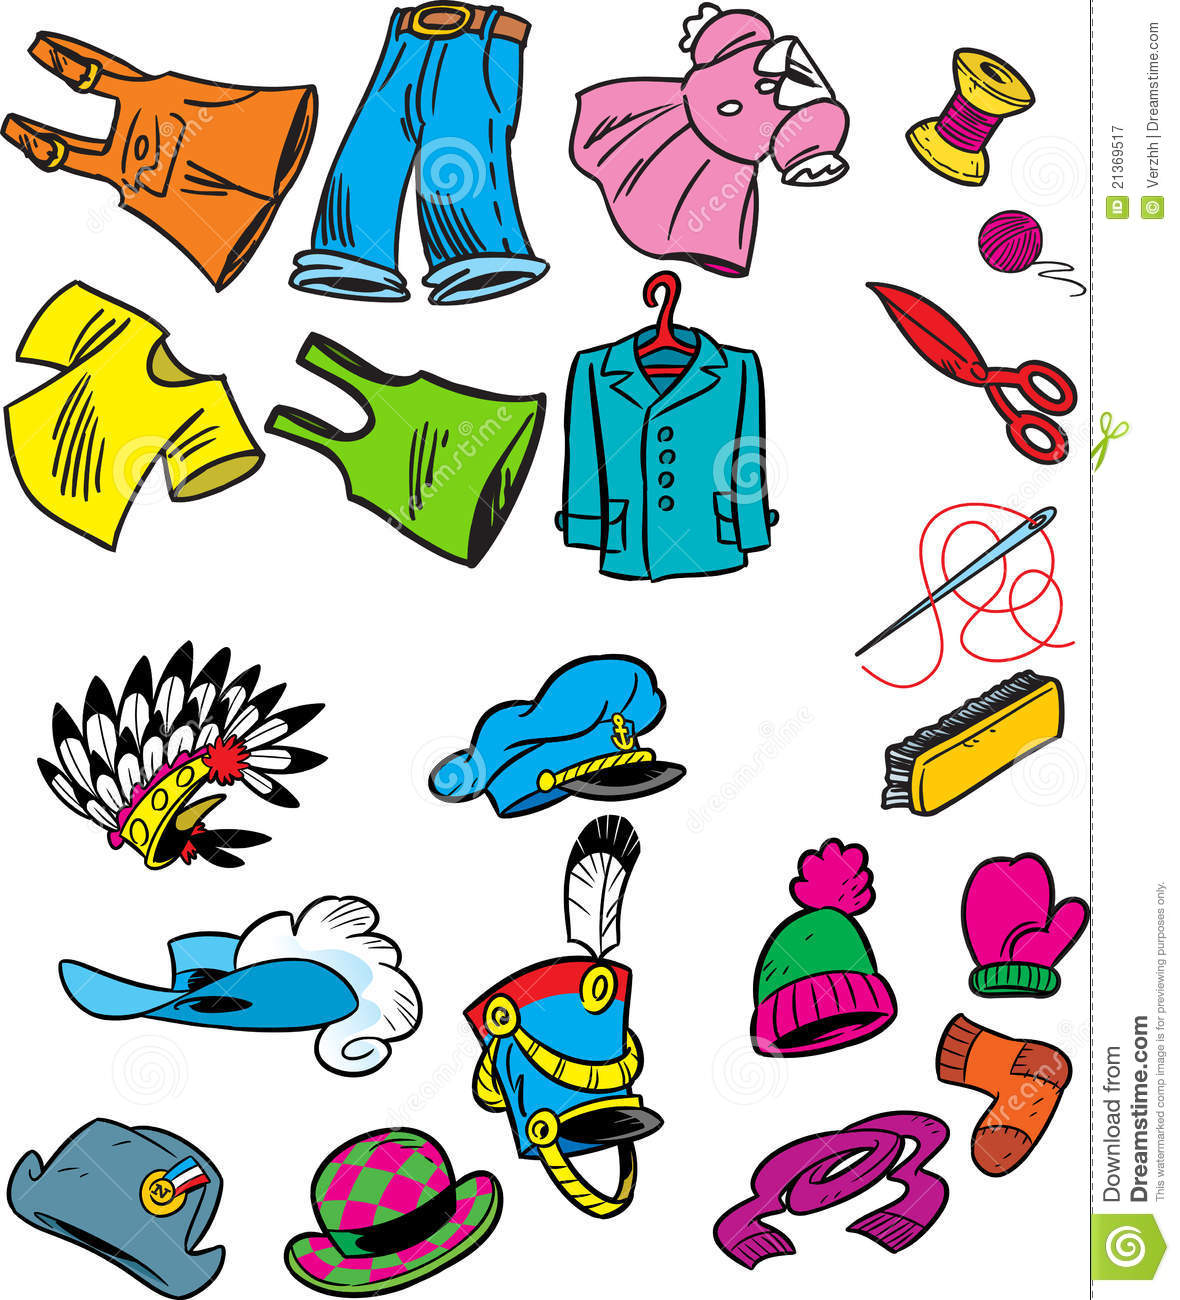 The Figure Shows Some Types Of Hats Clothing And Sewing In A Cartoon